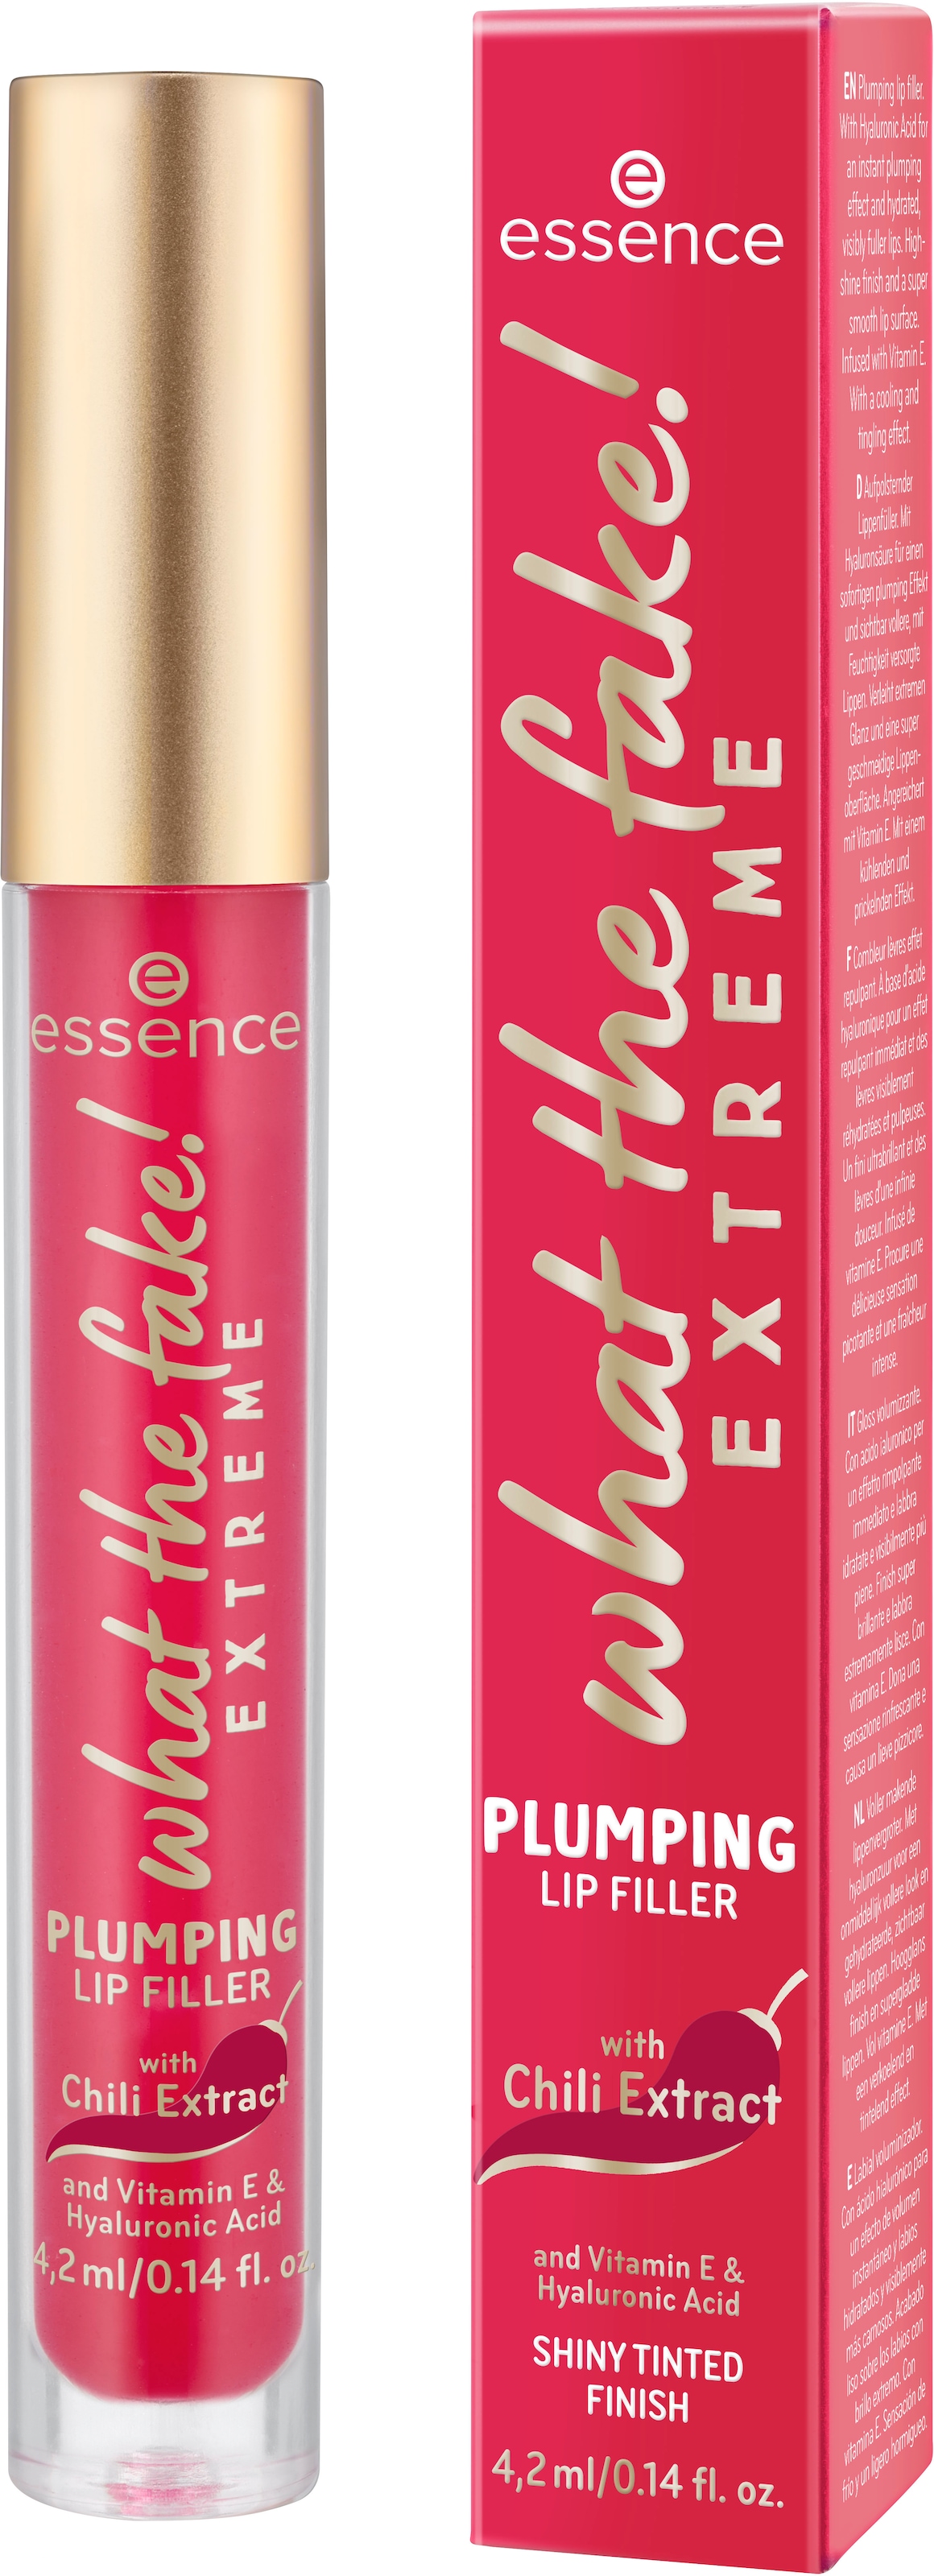 Essence Lip-Booster »what the fake! ♕ LIP bei tlg.) EXTREME 3 FILLER«, PLUMPING (Set